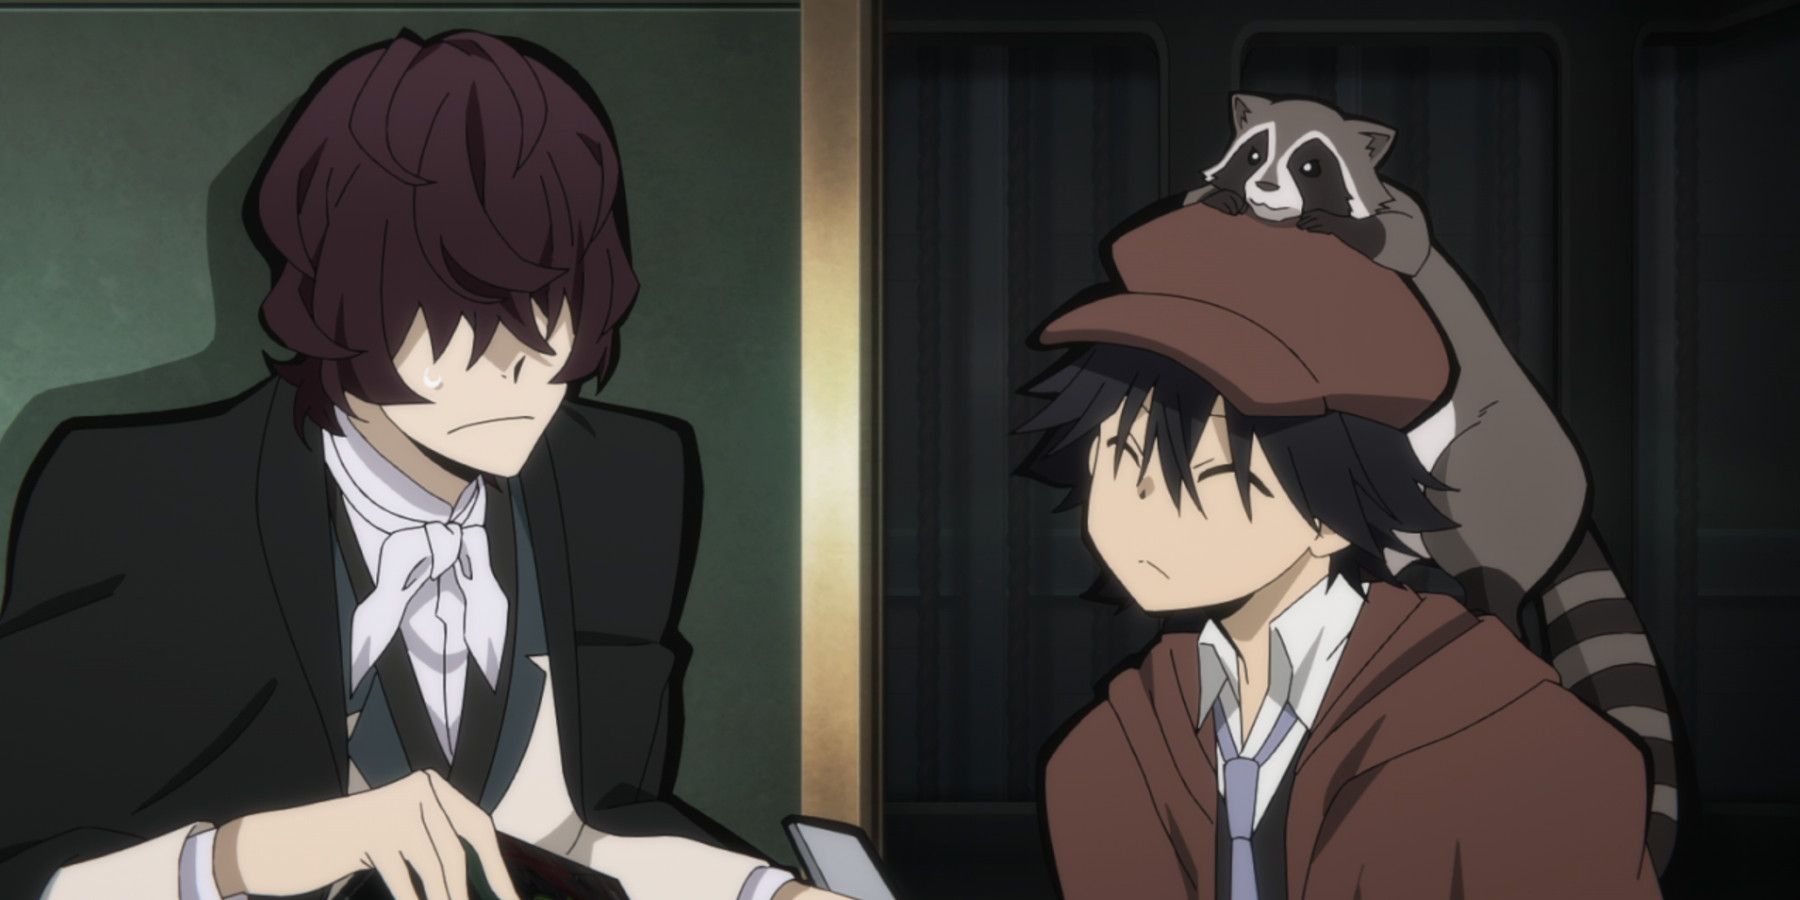 Bungo Stray Dogs' S4 E4 Audio Commentary: 'A Perfect Murder and Murderer  (Part 1)